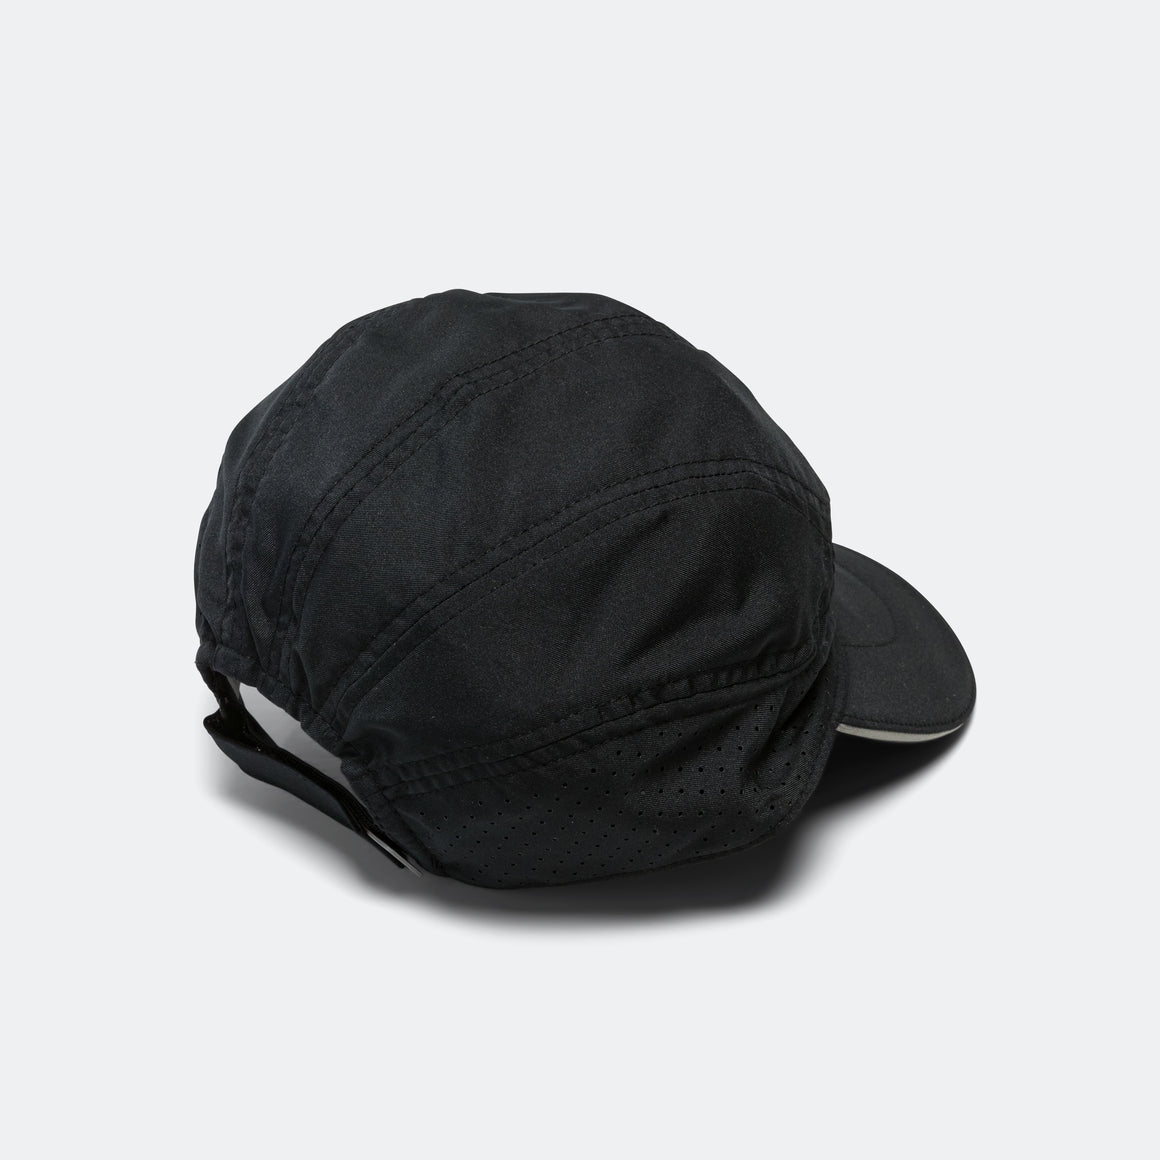 Nike - Dri-FIT Fly Cap - Black - Up There Athletics